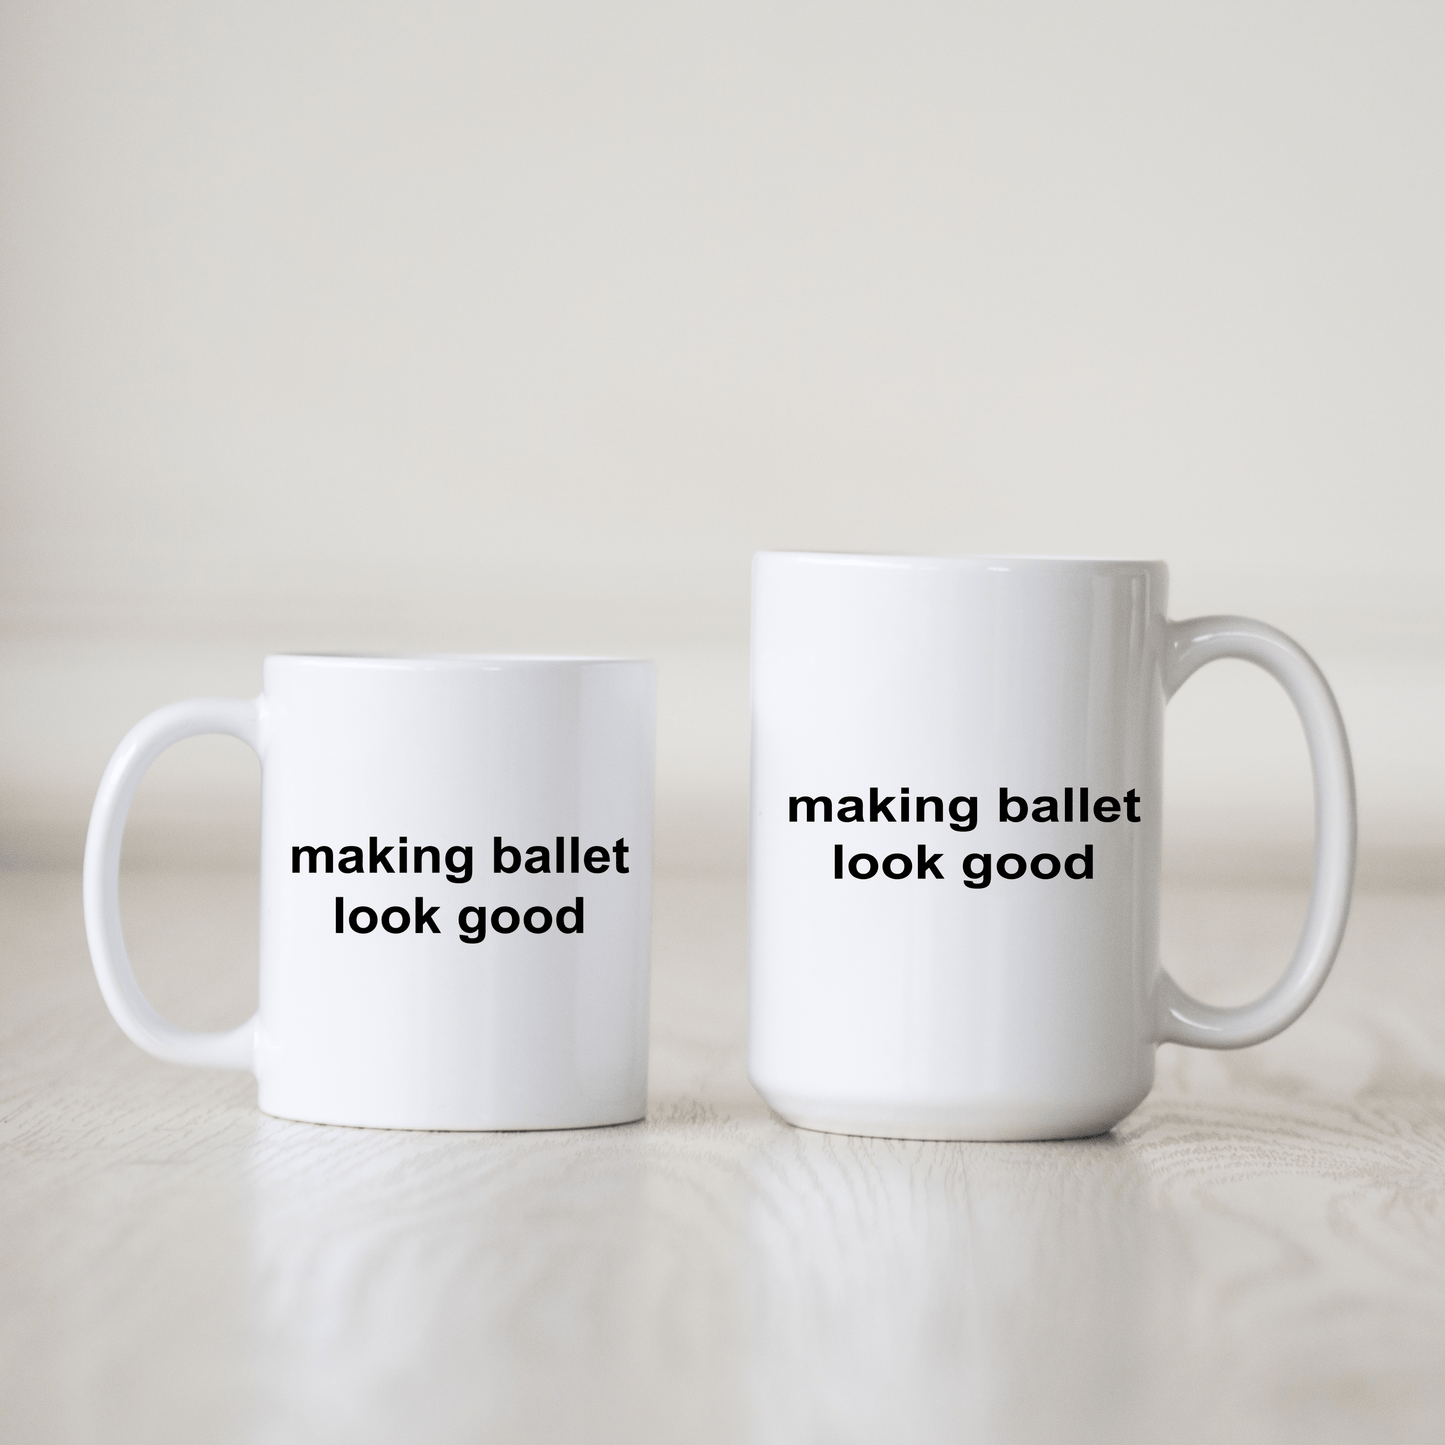 Making Ballet Look Good Funny Novelty Coffee Mug Makes a Great Gift for a Dancer or Dance Teacher